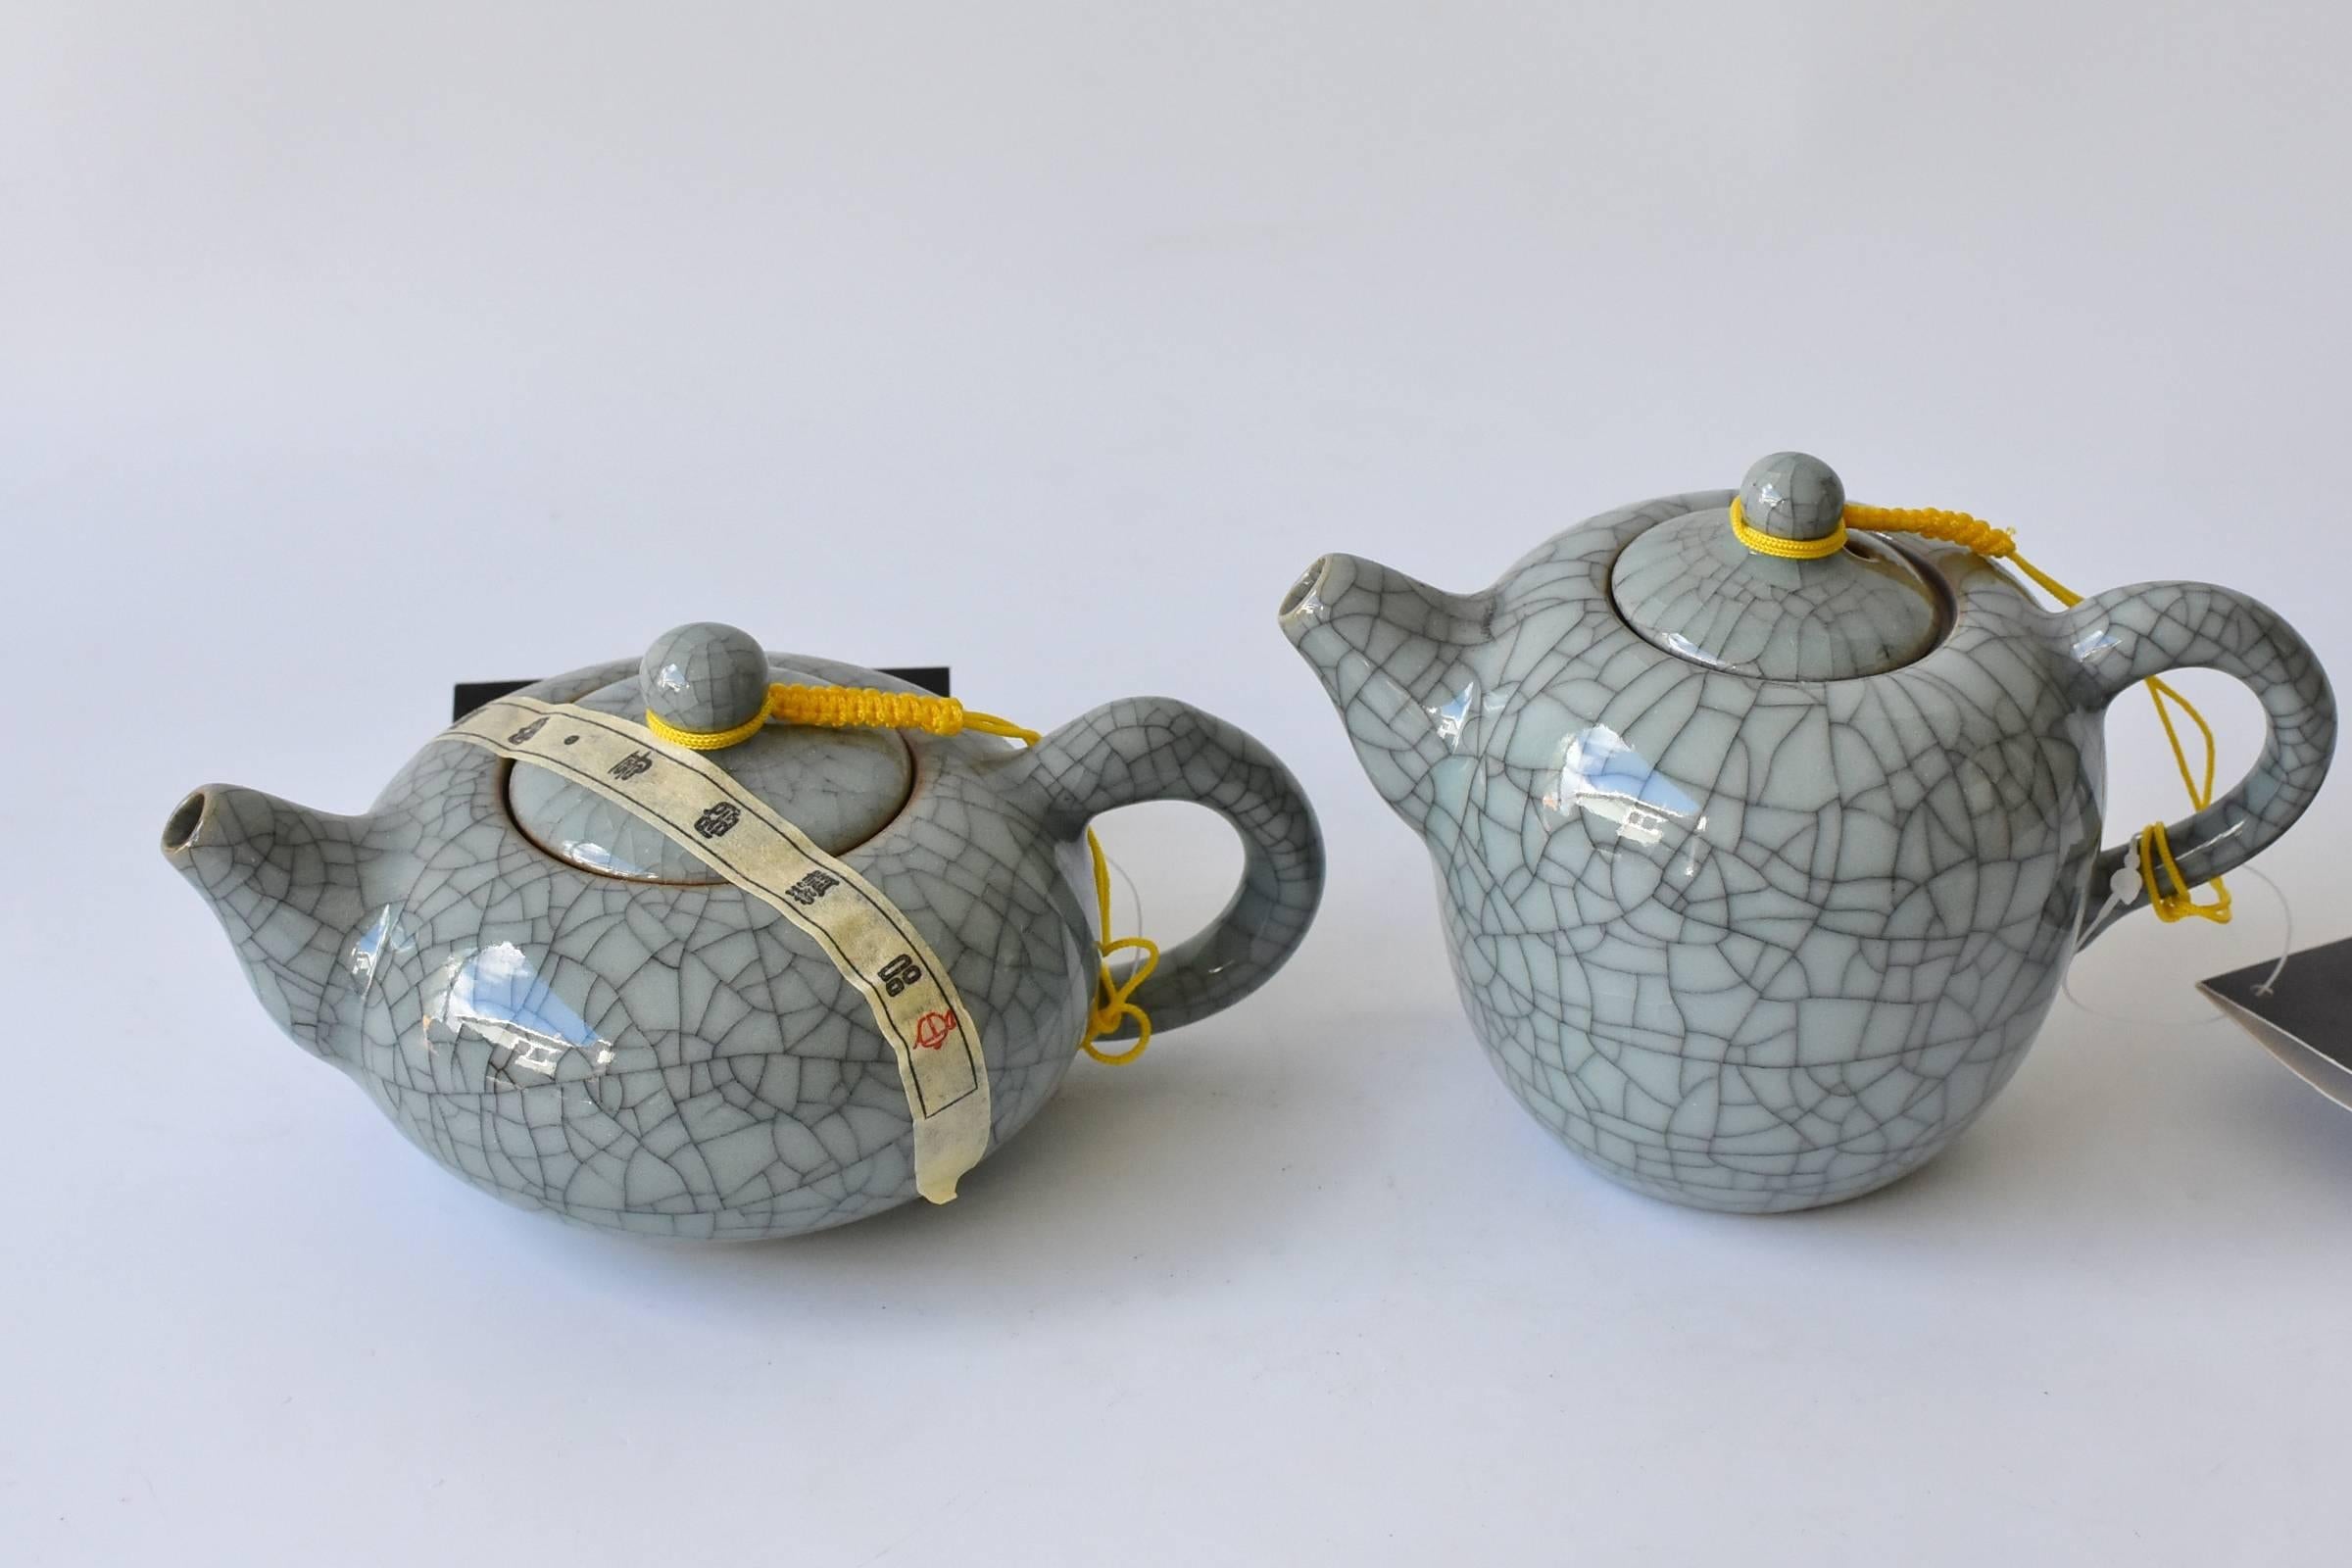 A set of fully functional celadon porcelain consists 13 beautiful, brand new, hand made pieces. These are meant to be used, not just as decorations. There are two incense burners, one washer bowl, two teapots, eight tea cups. This type of porcelain